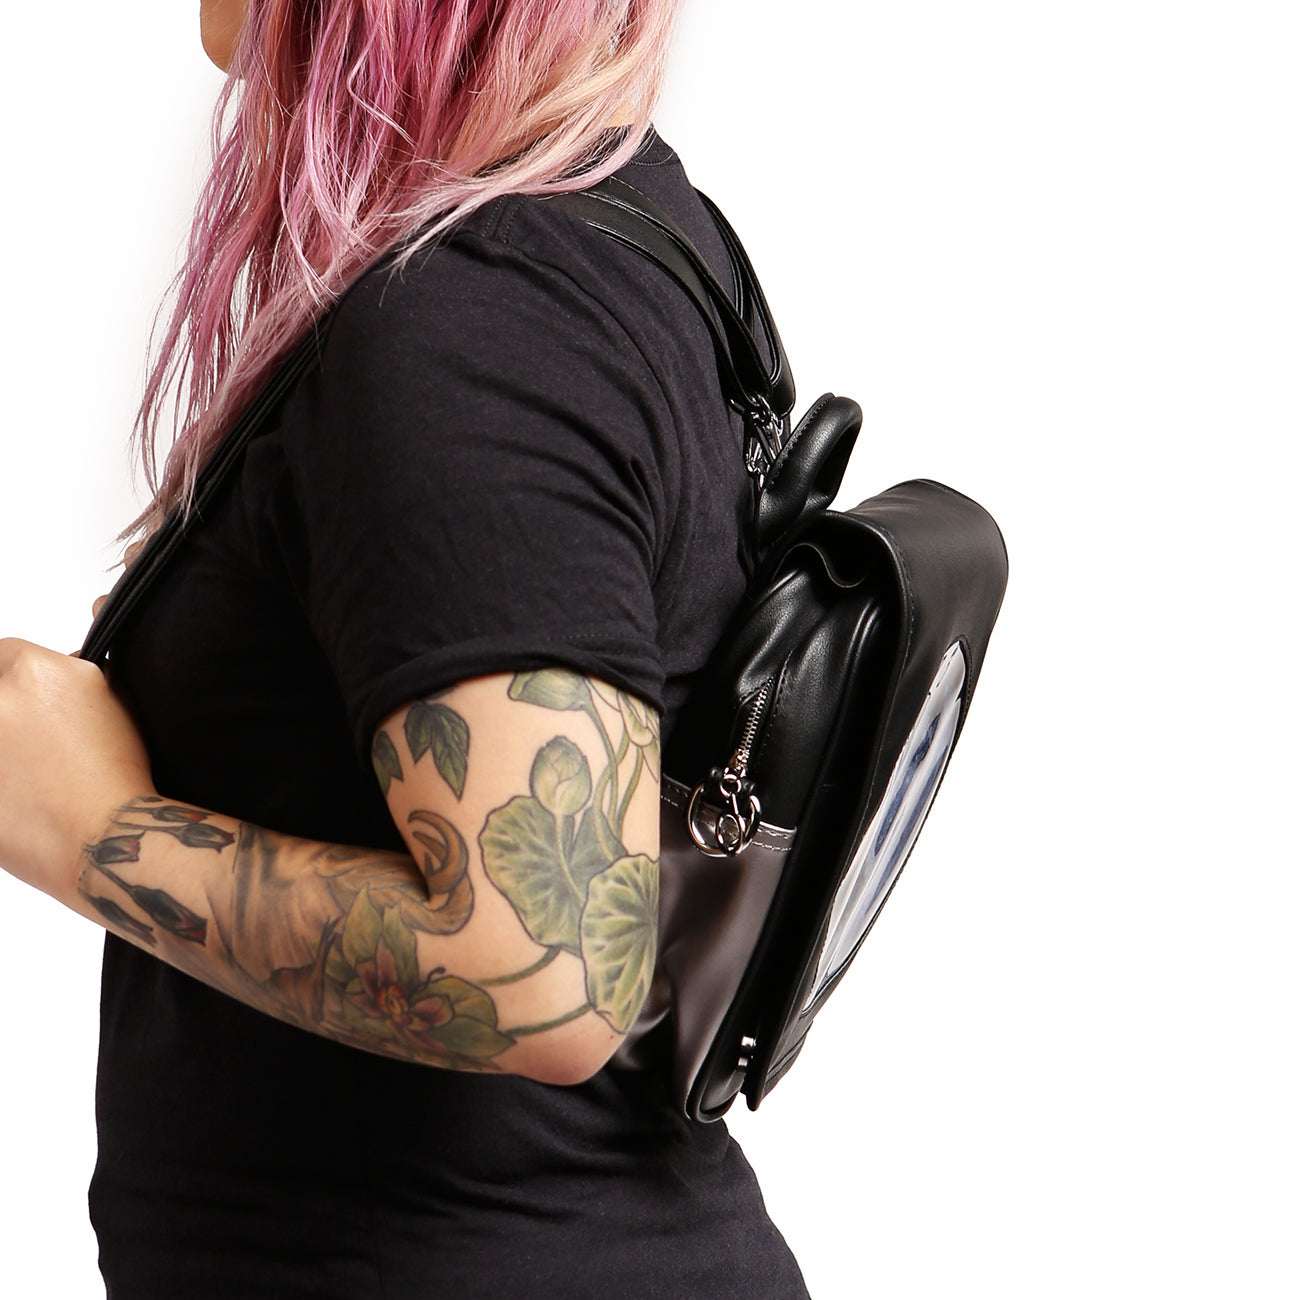 Side view of model wearing Moon Ita Bag as a backpack on white background.